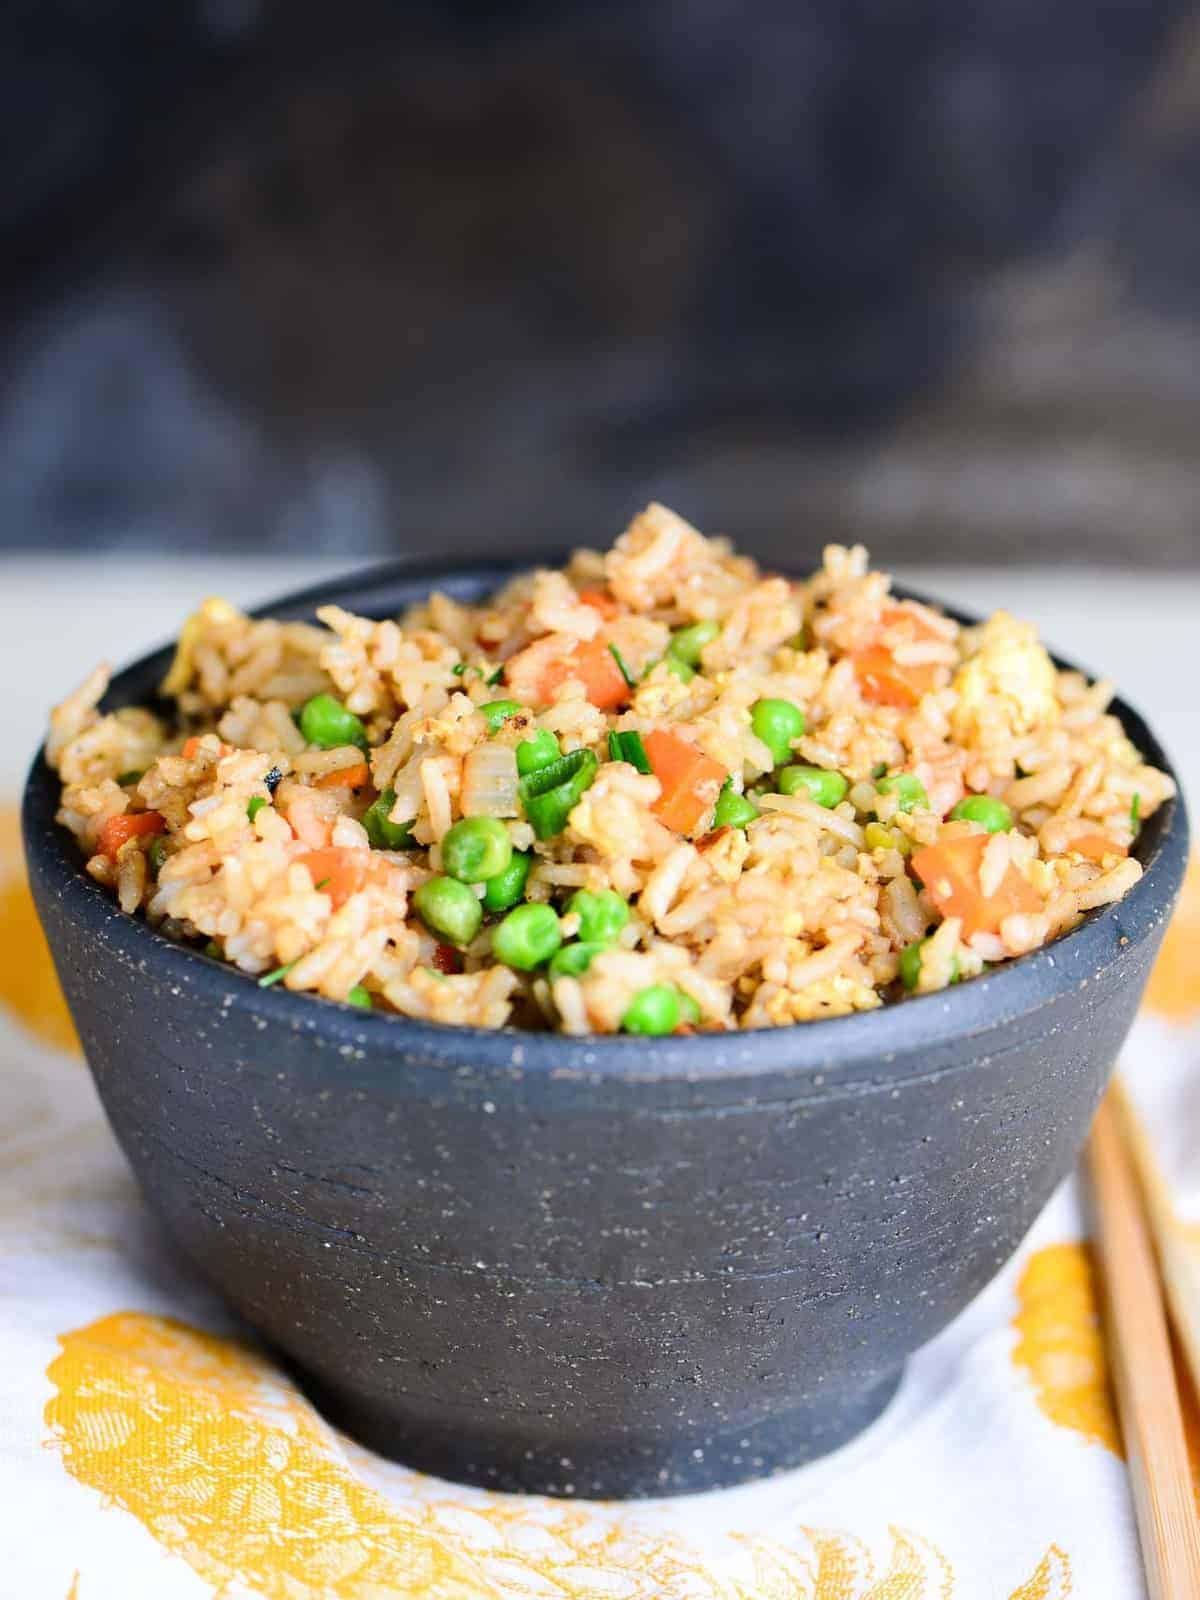 take out style fried rice with chopsticks in a black bowl